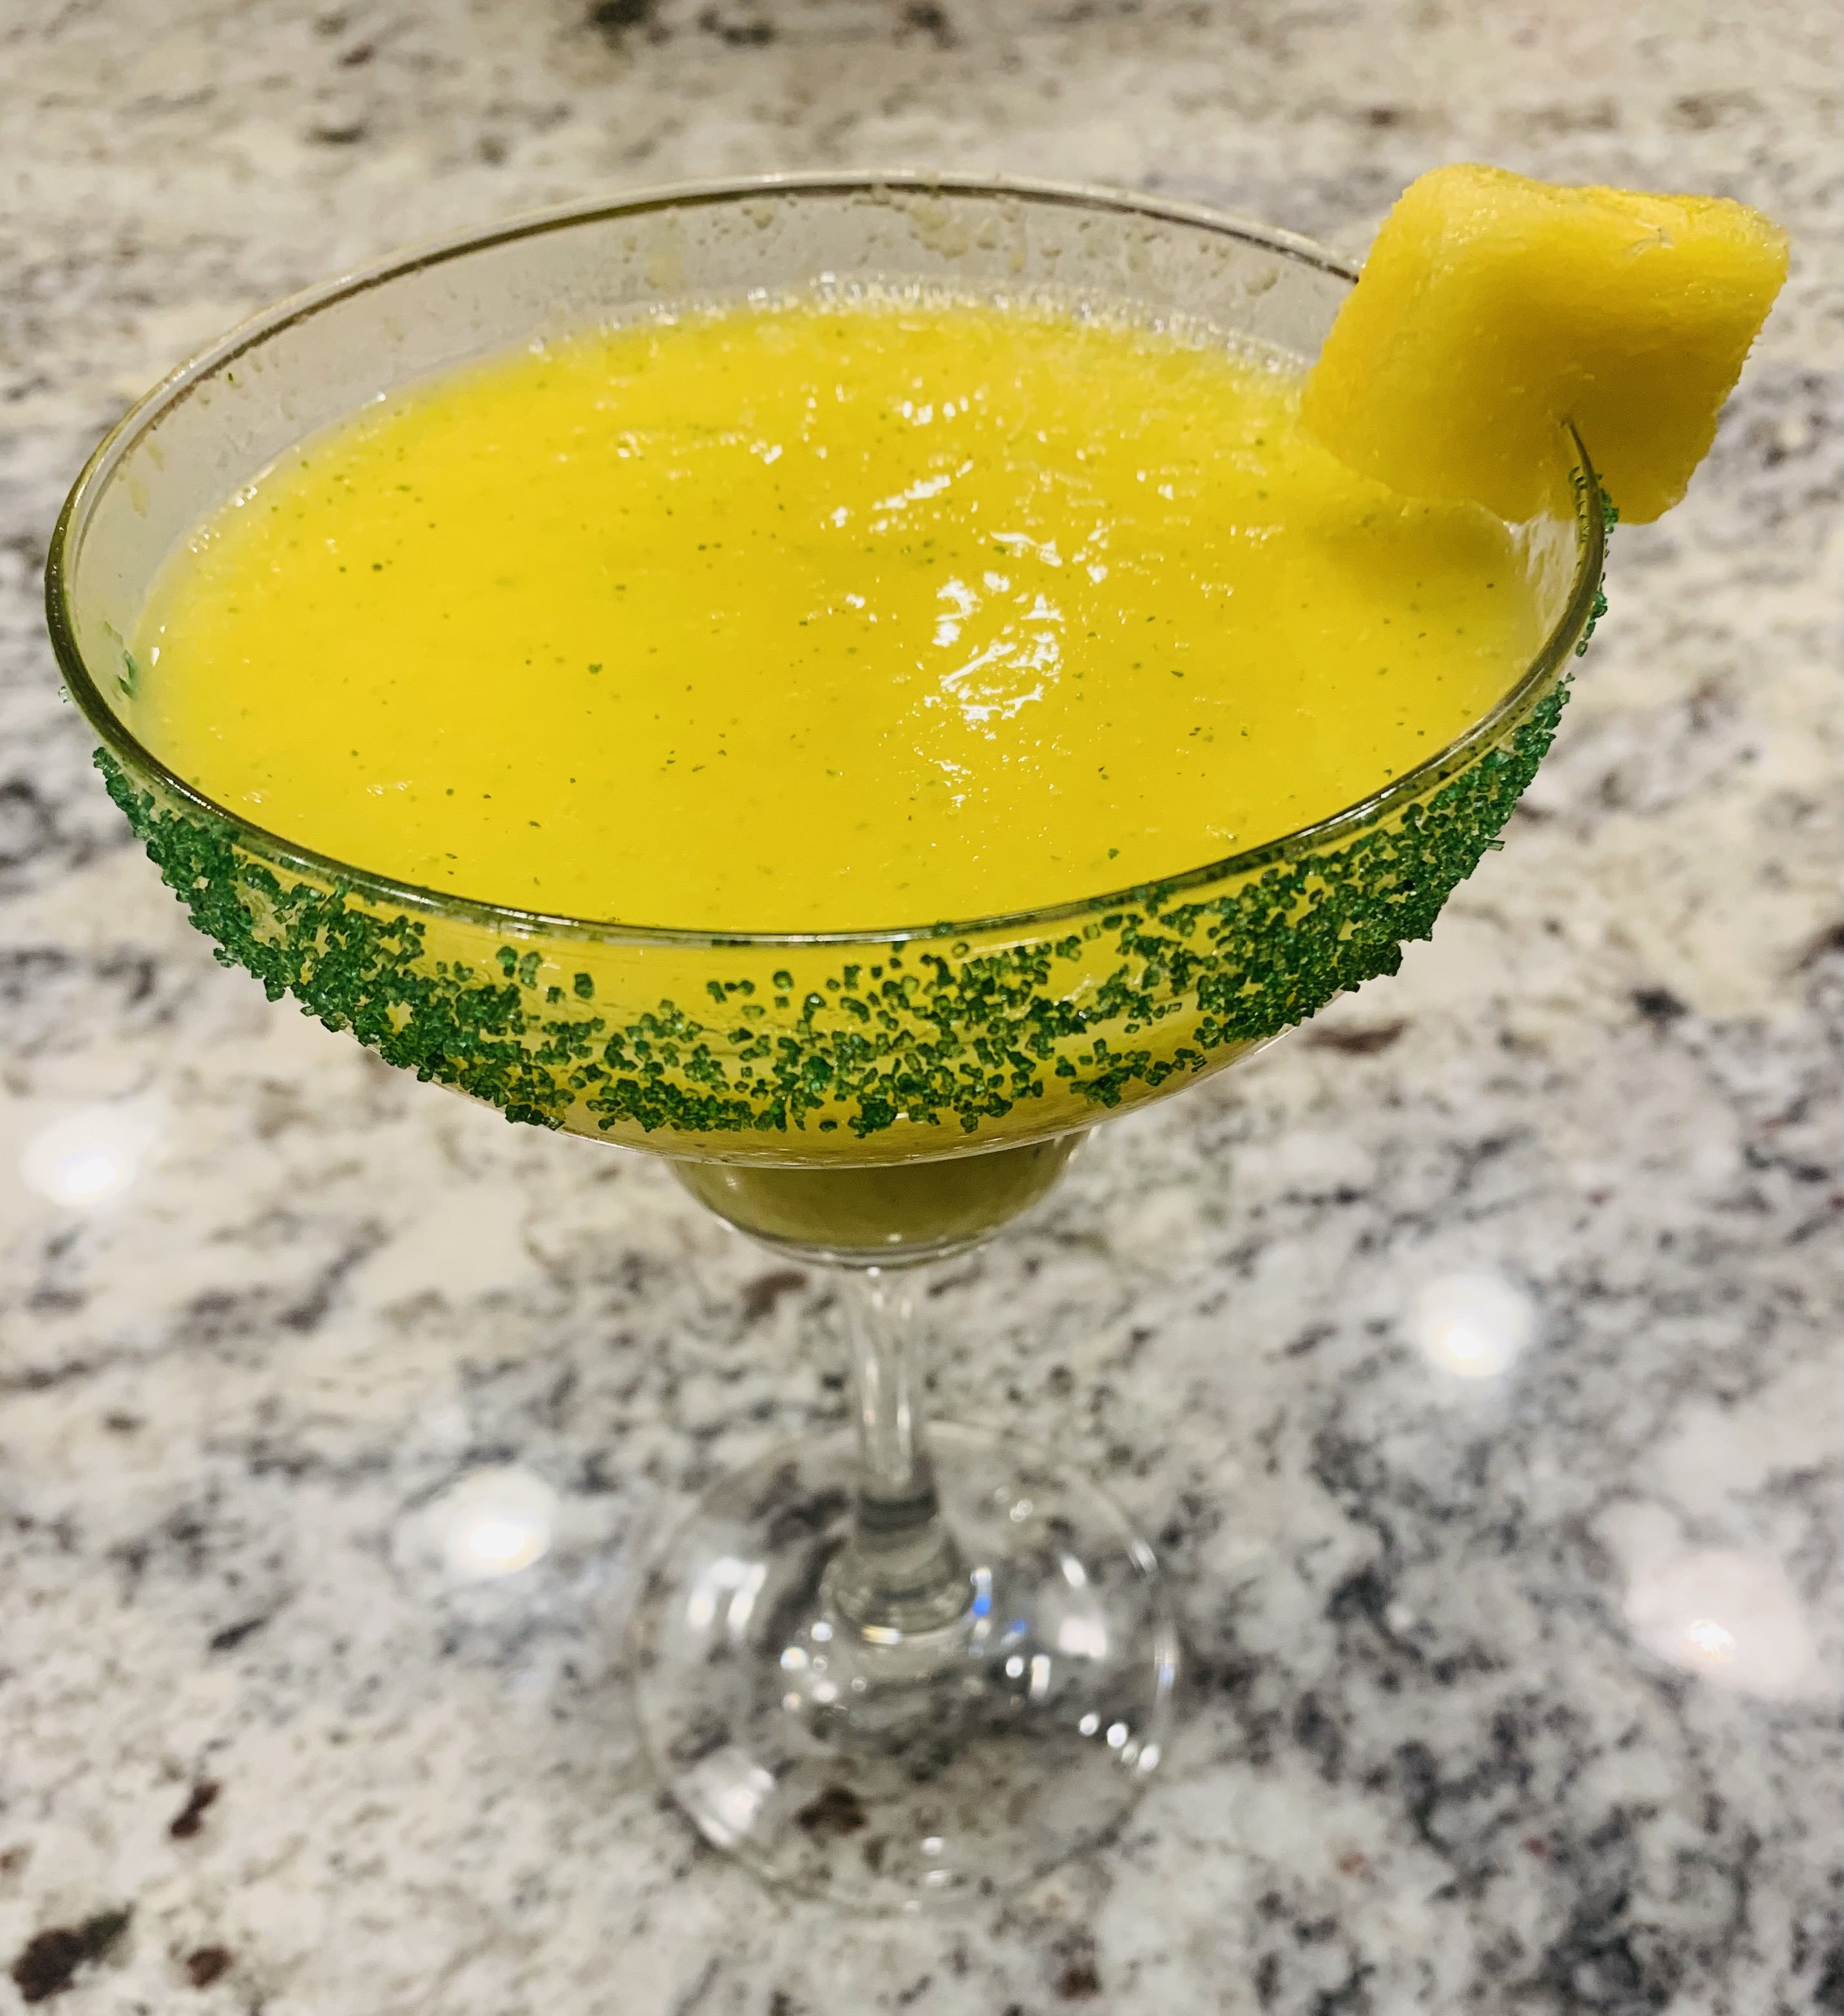 Vegan-ish: A Physician’s Journey to More Plant-Based Meals: Dr. Monique’s Mango Muddled Mint Mock Mo-garita